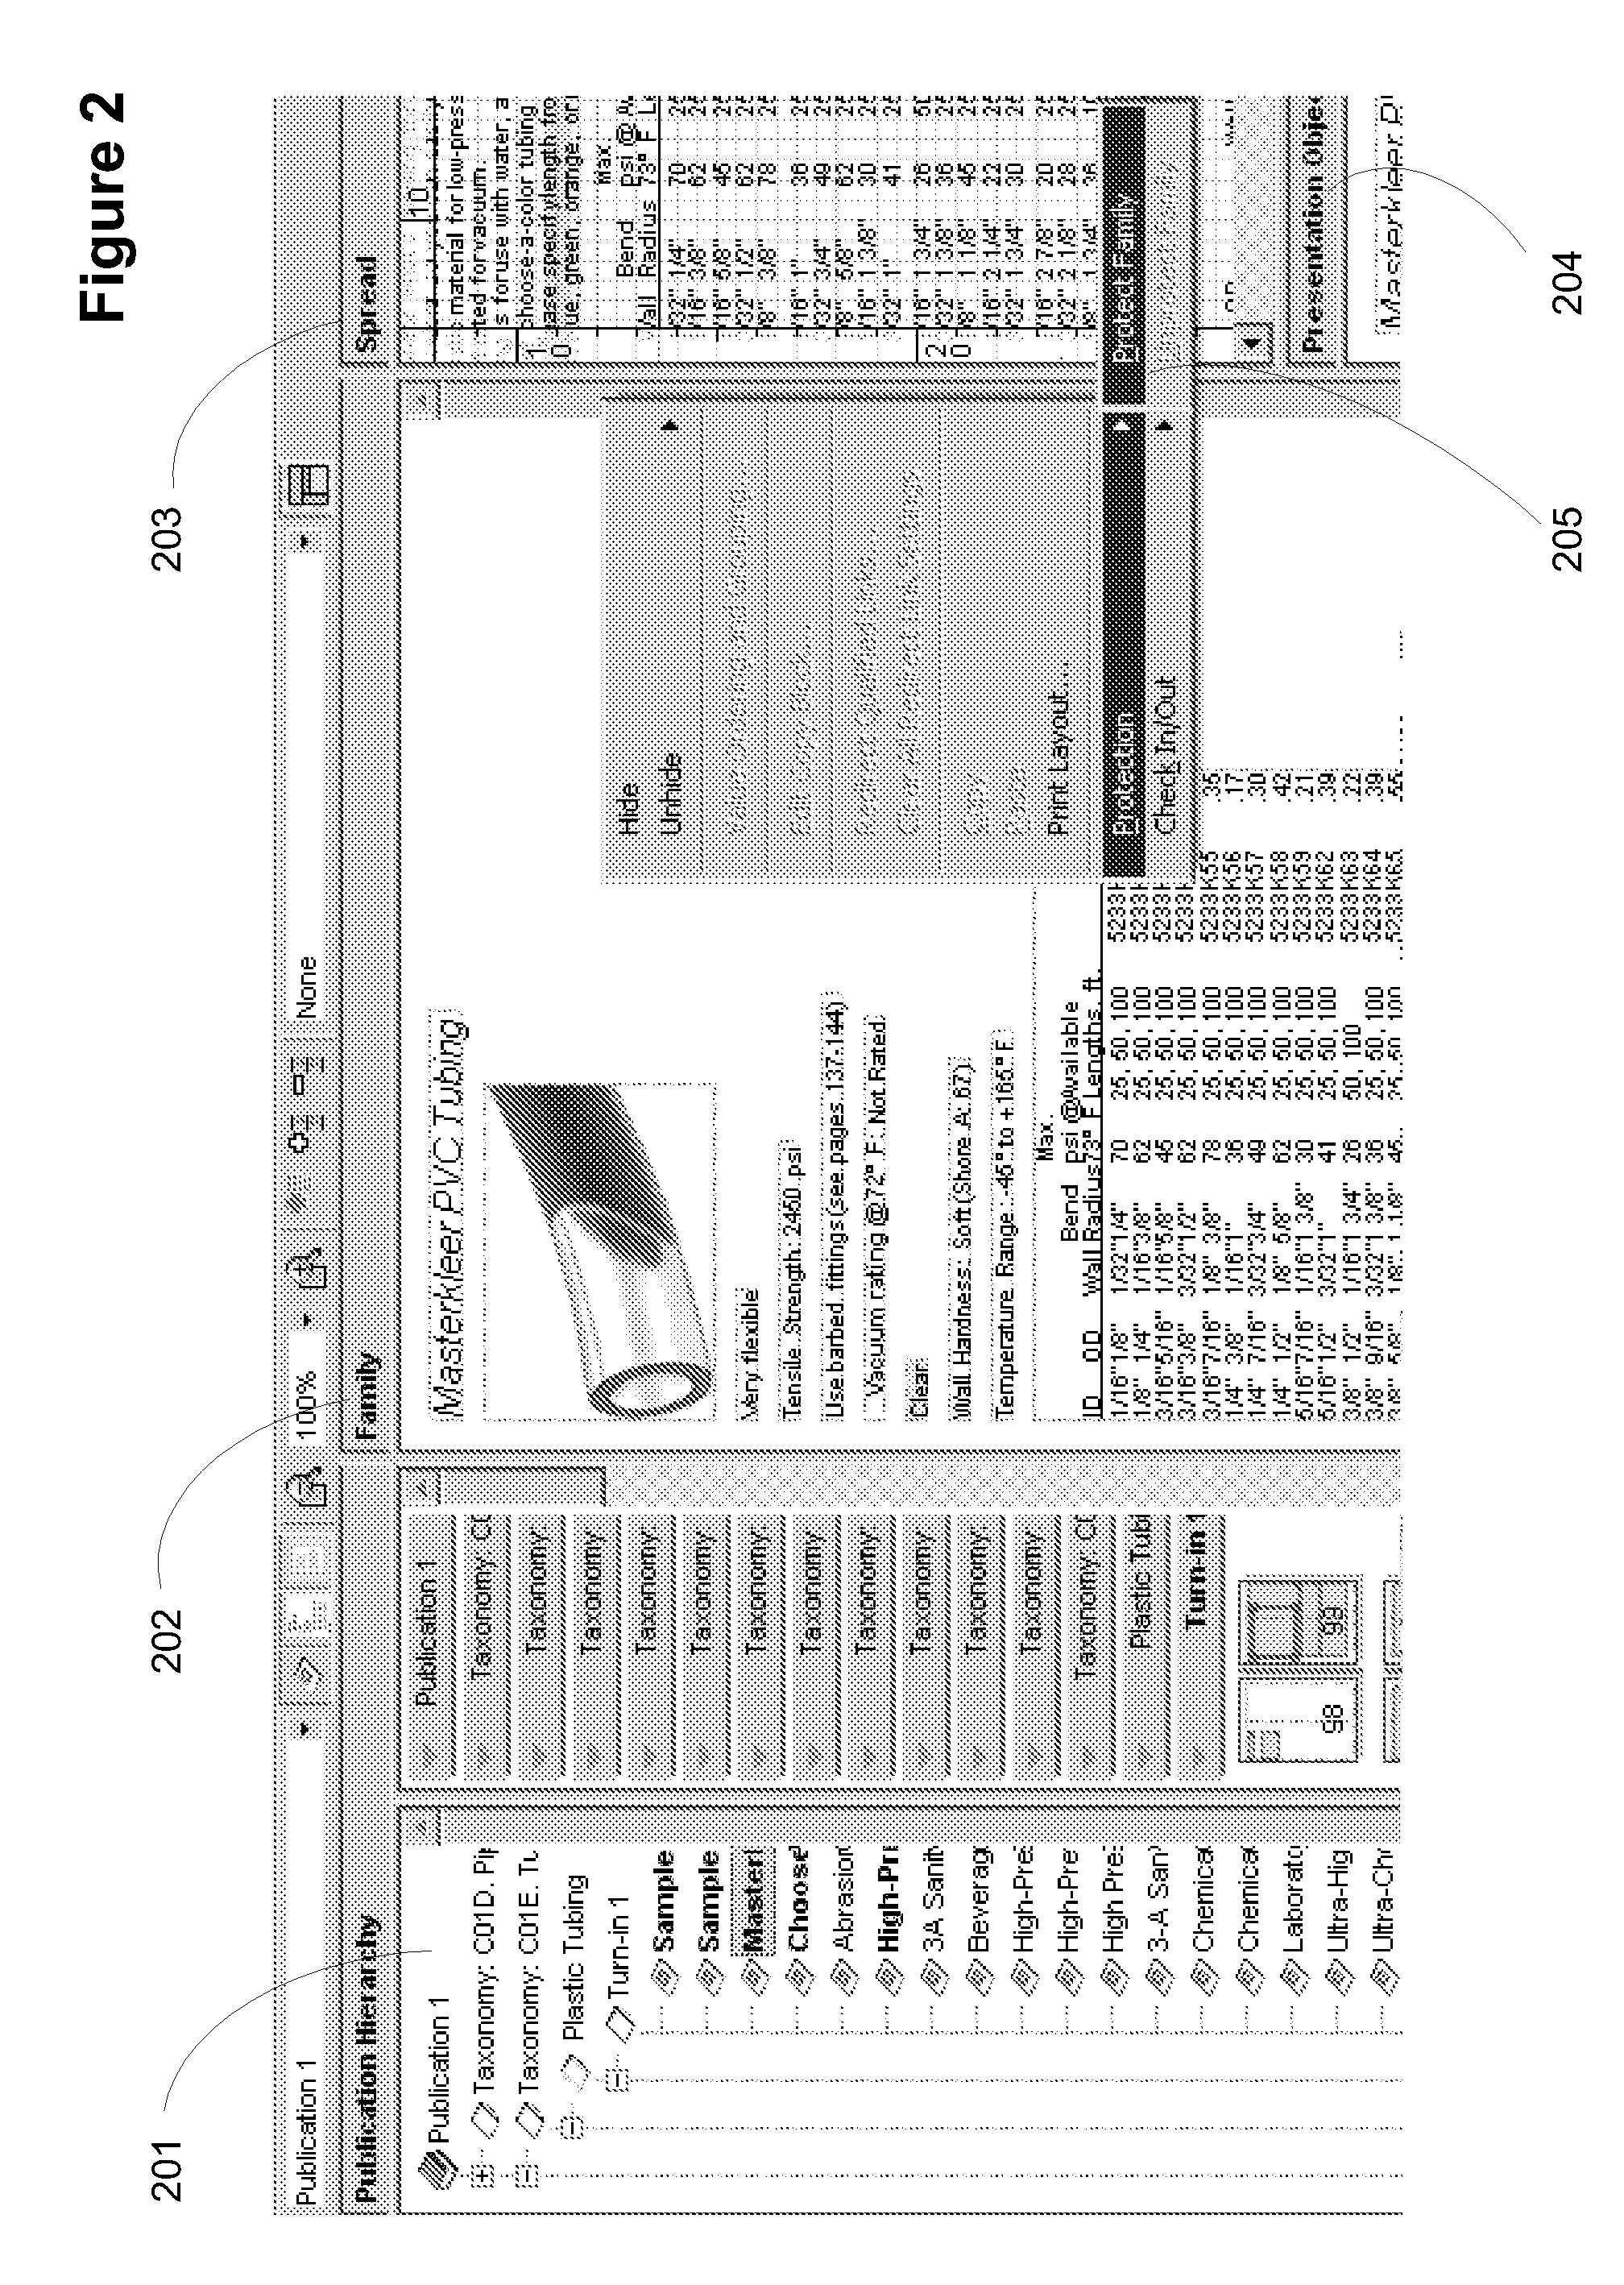 Multi-user document editing system and method